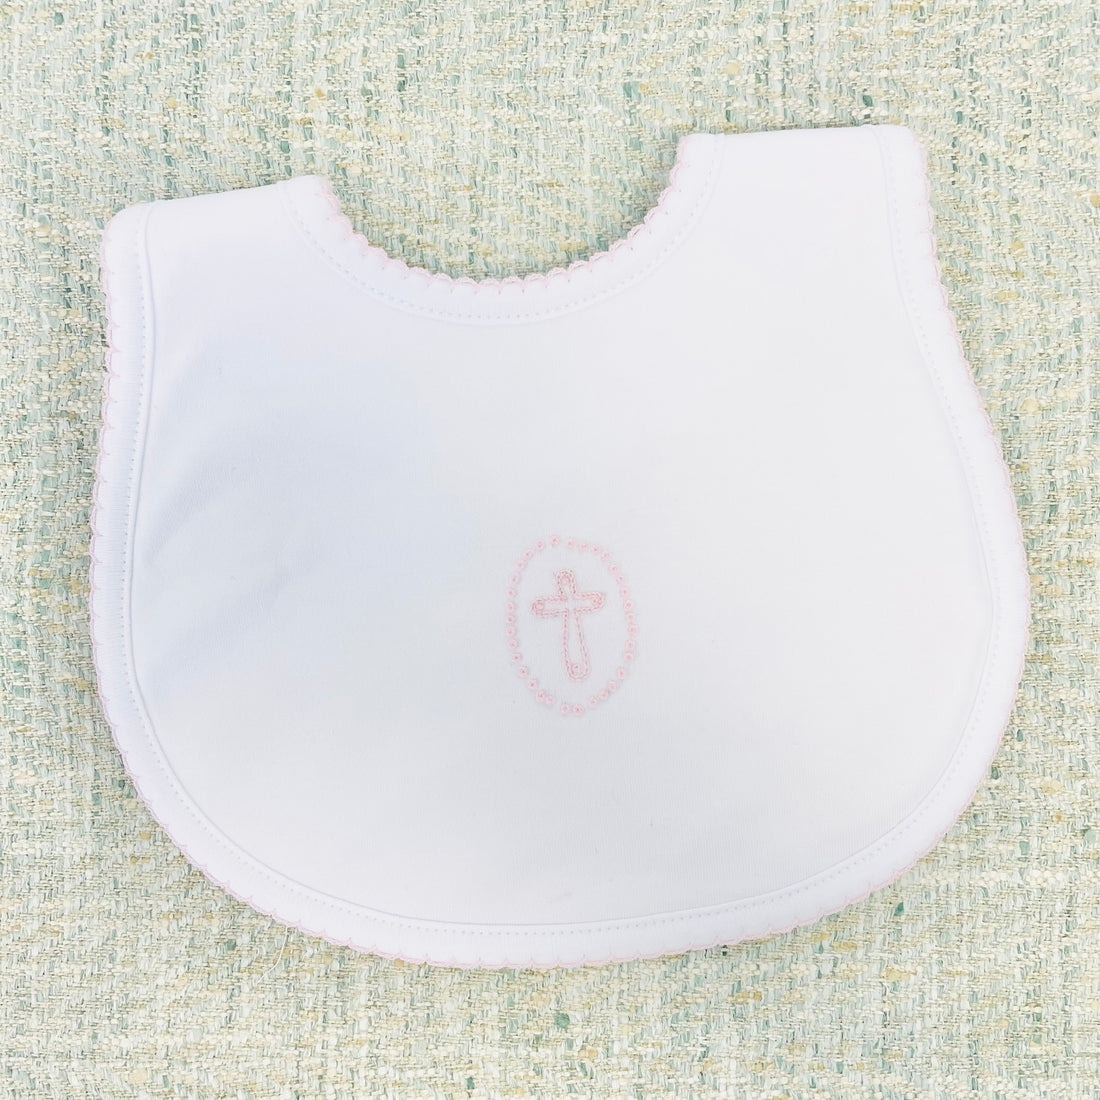 Magnolia Baby Blessed Embroidered Bib